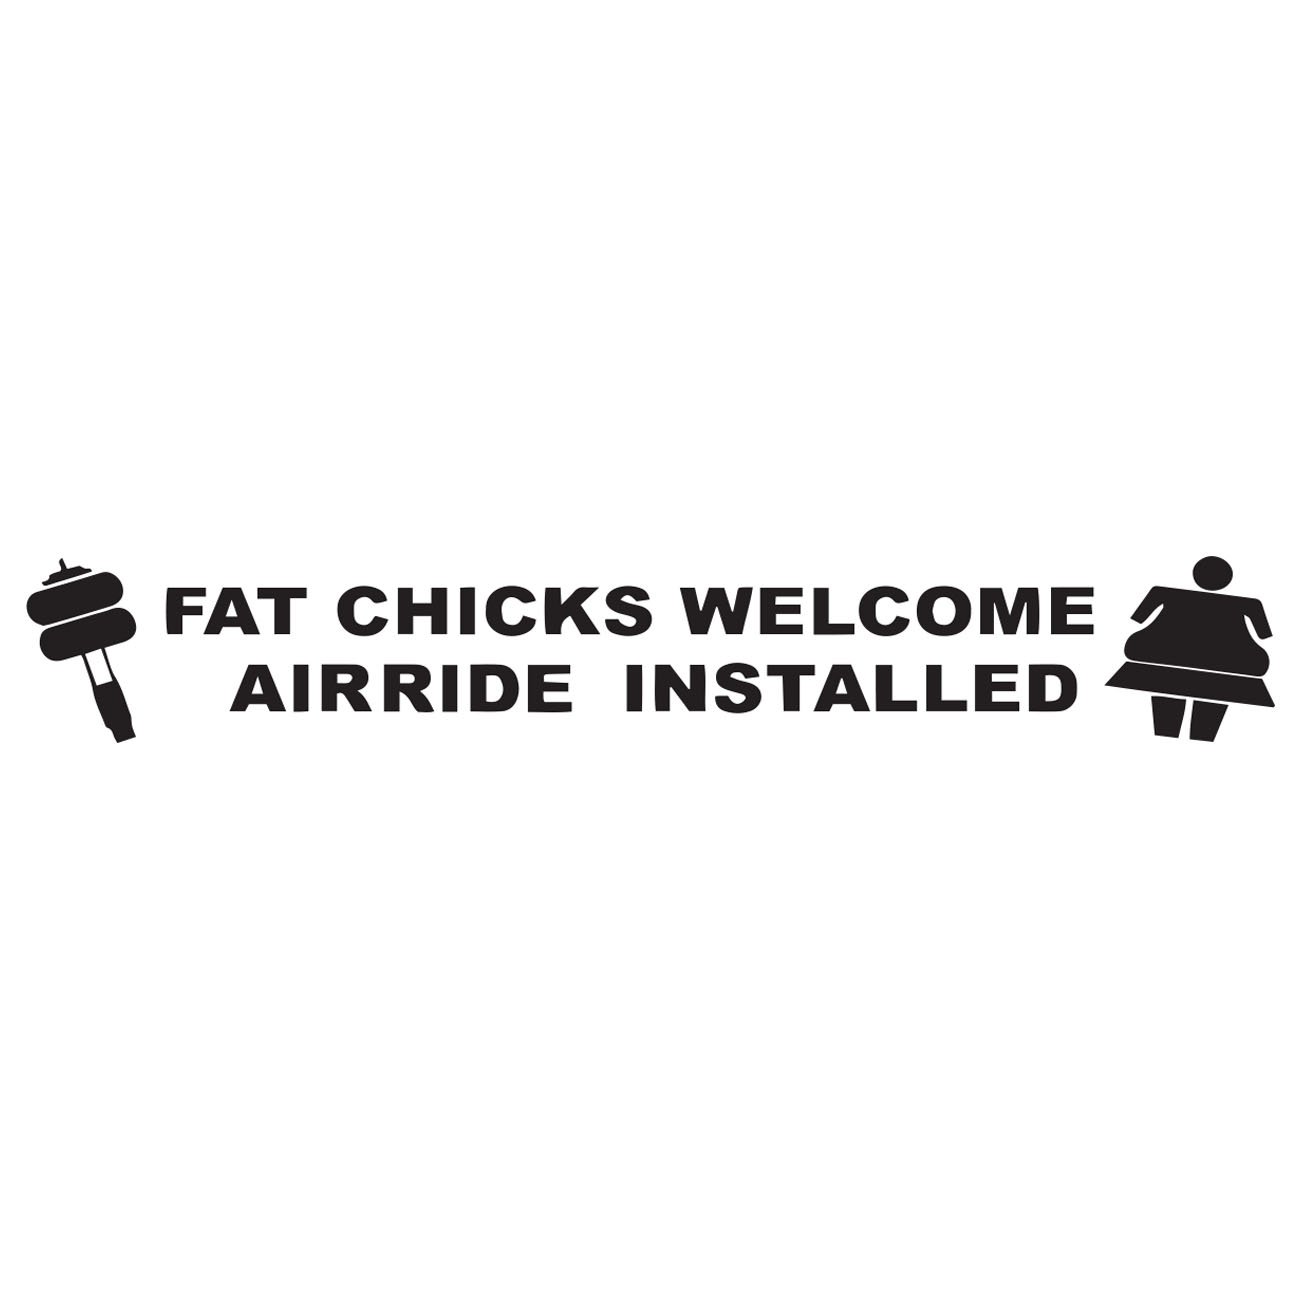 Fat chicks welcome - Airride installed